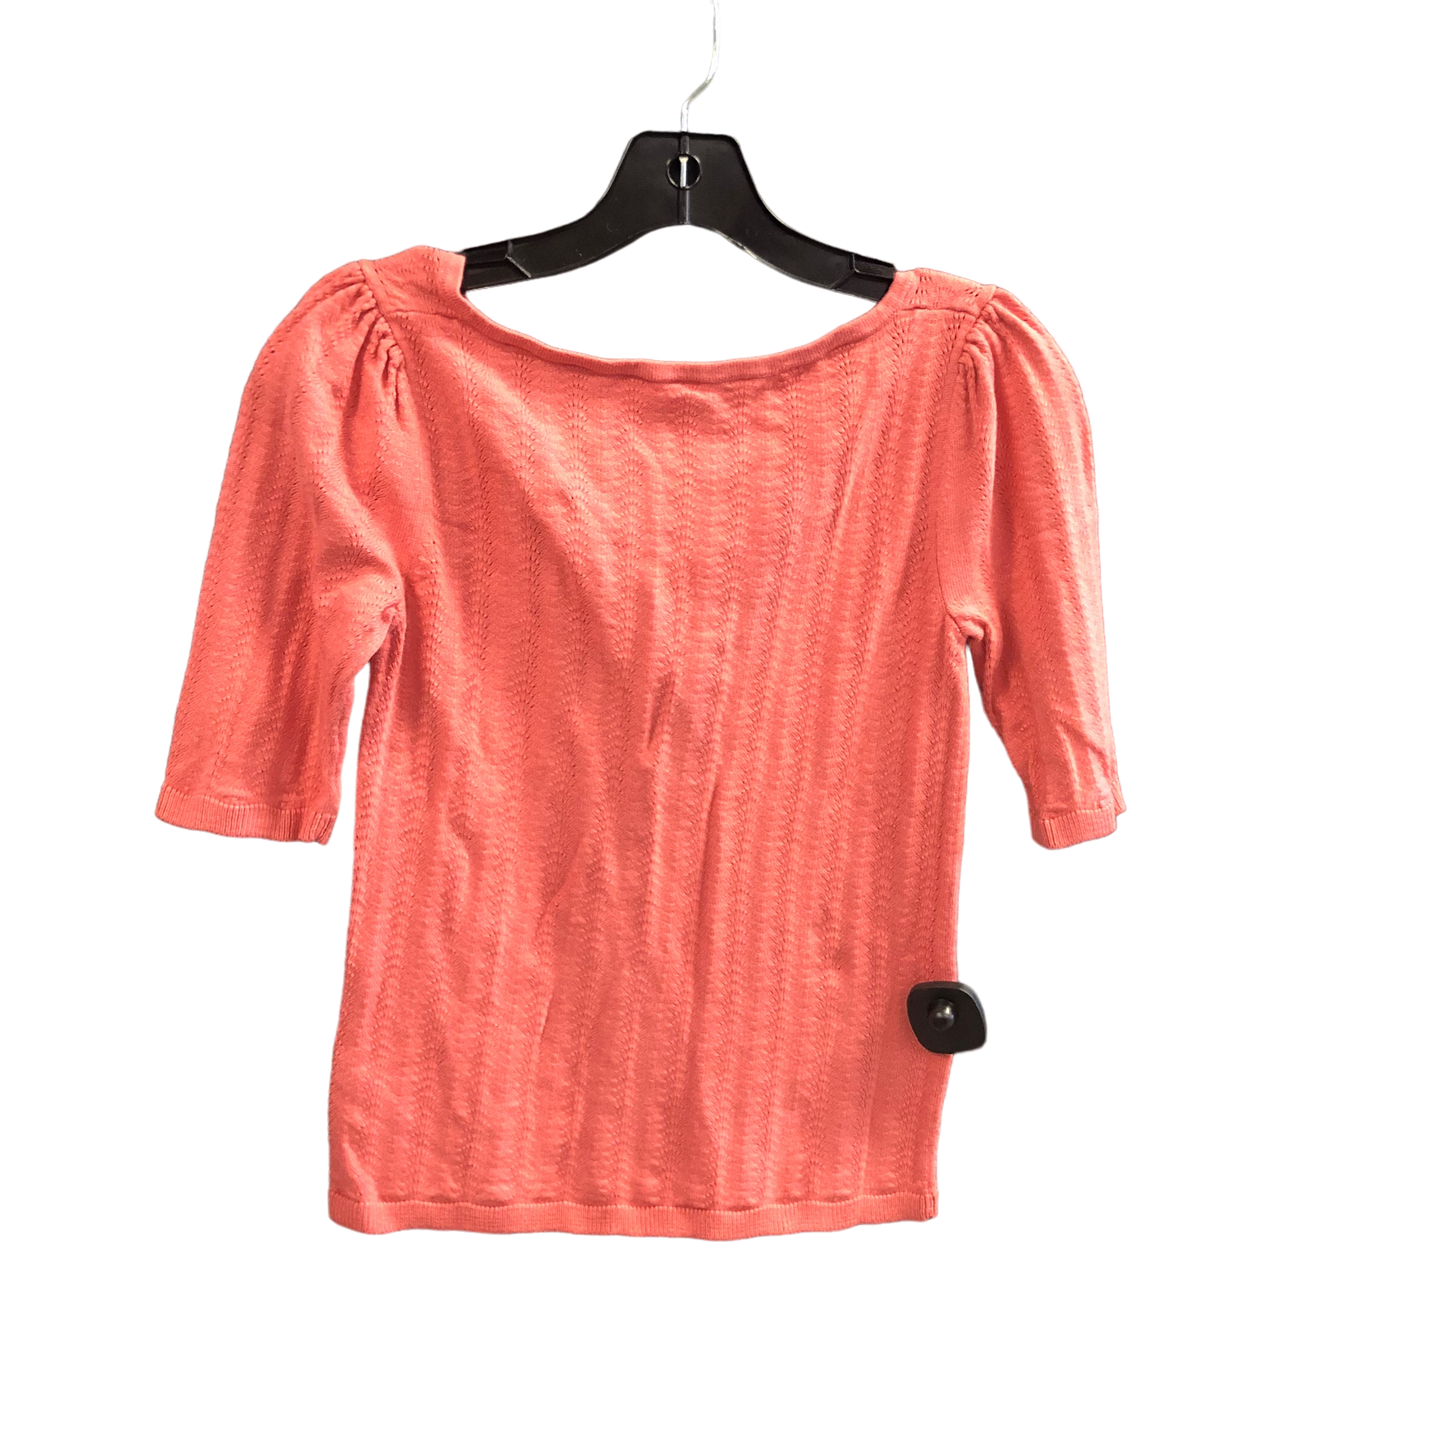 Pink Top 3/4 Sleeve Ann Taylor, Size Xs